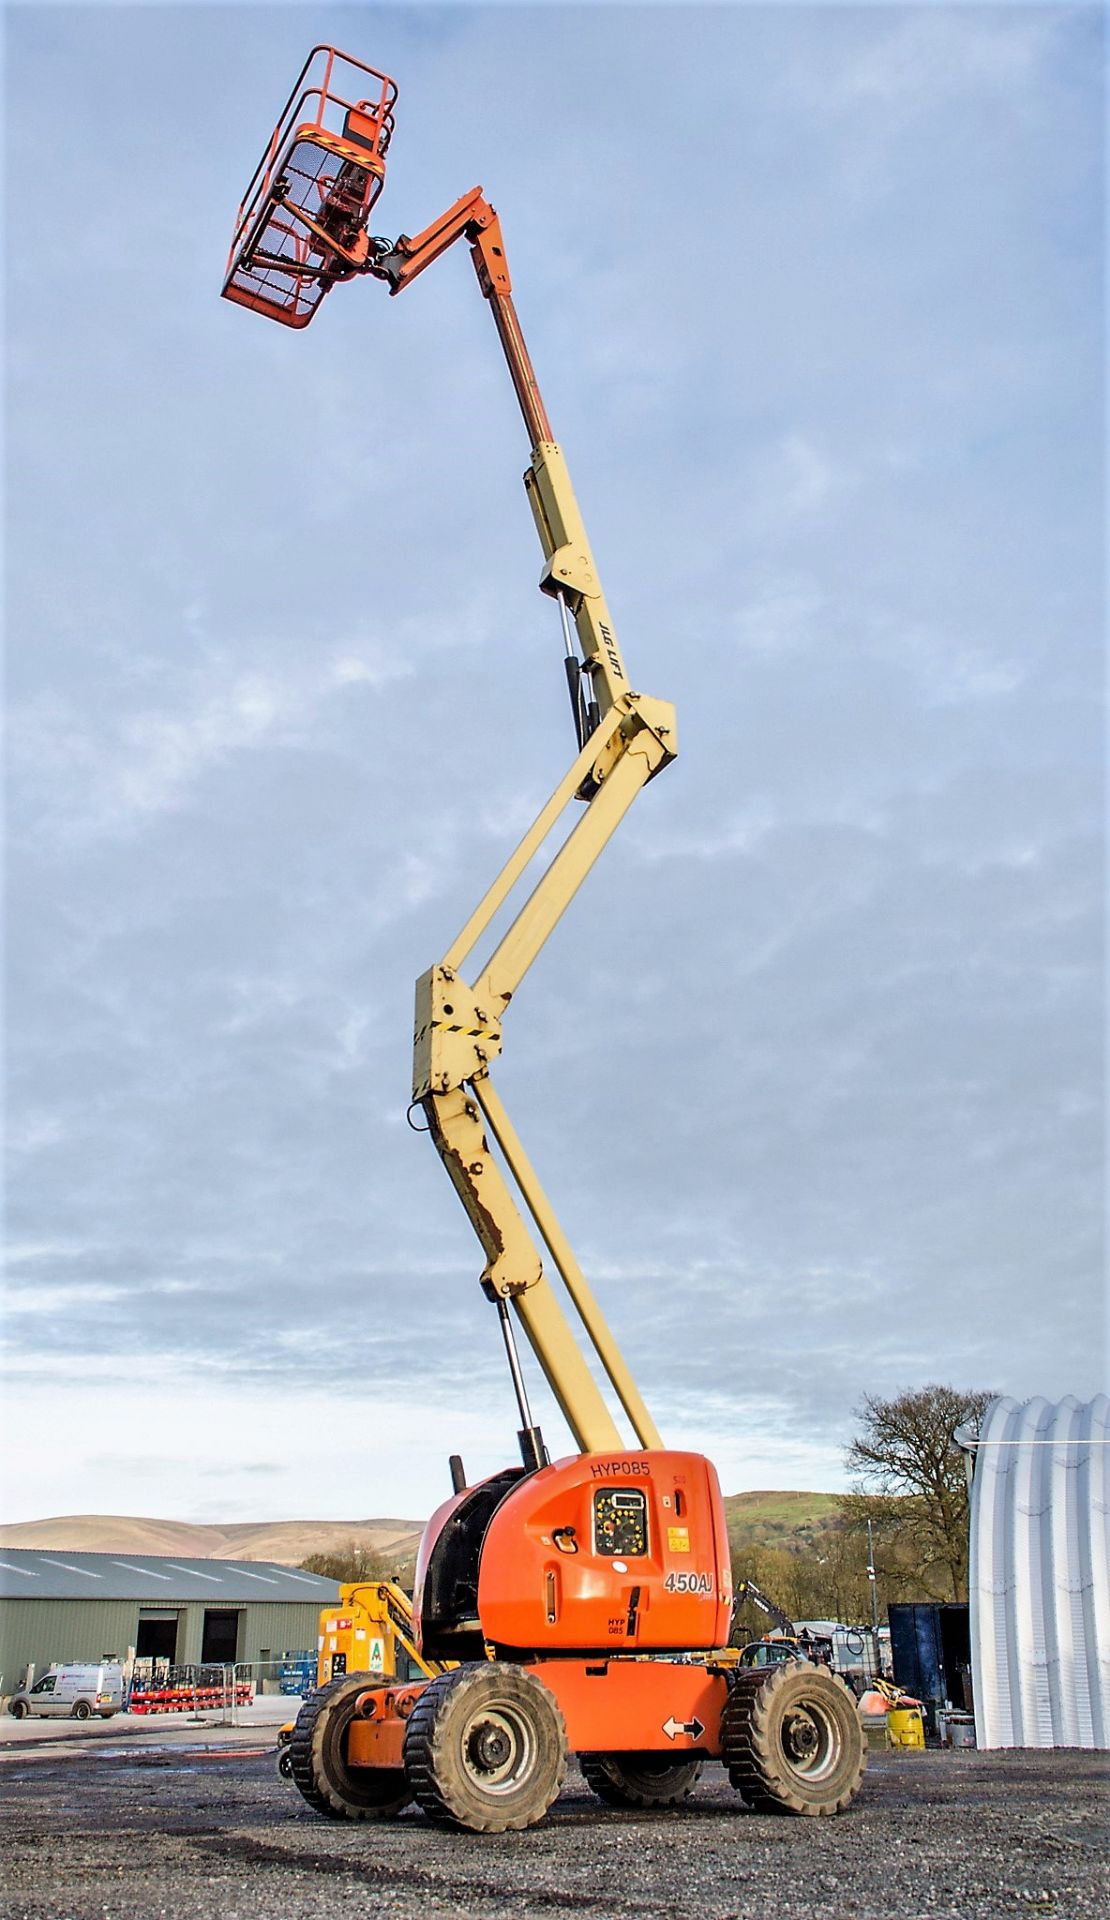 JLG 450AJ diesel driven rough terrain articulated boom access platform Year: 2007 S/N: 5190 Recorded - Image 9 of 17